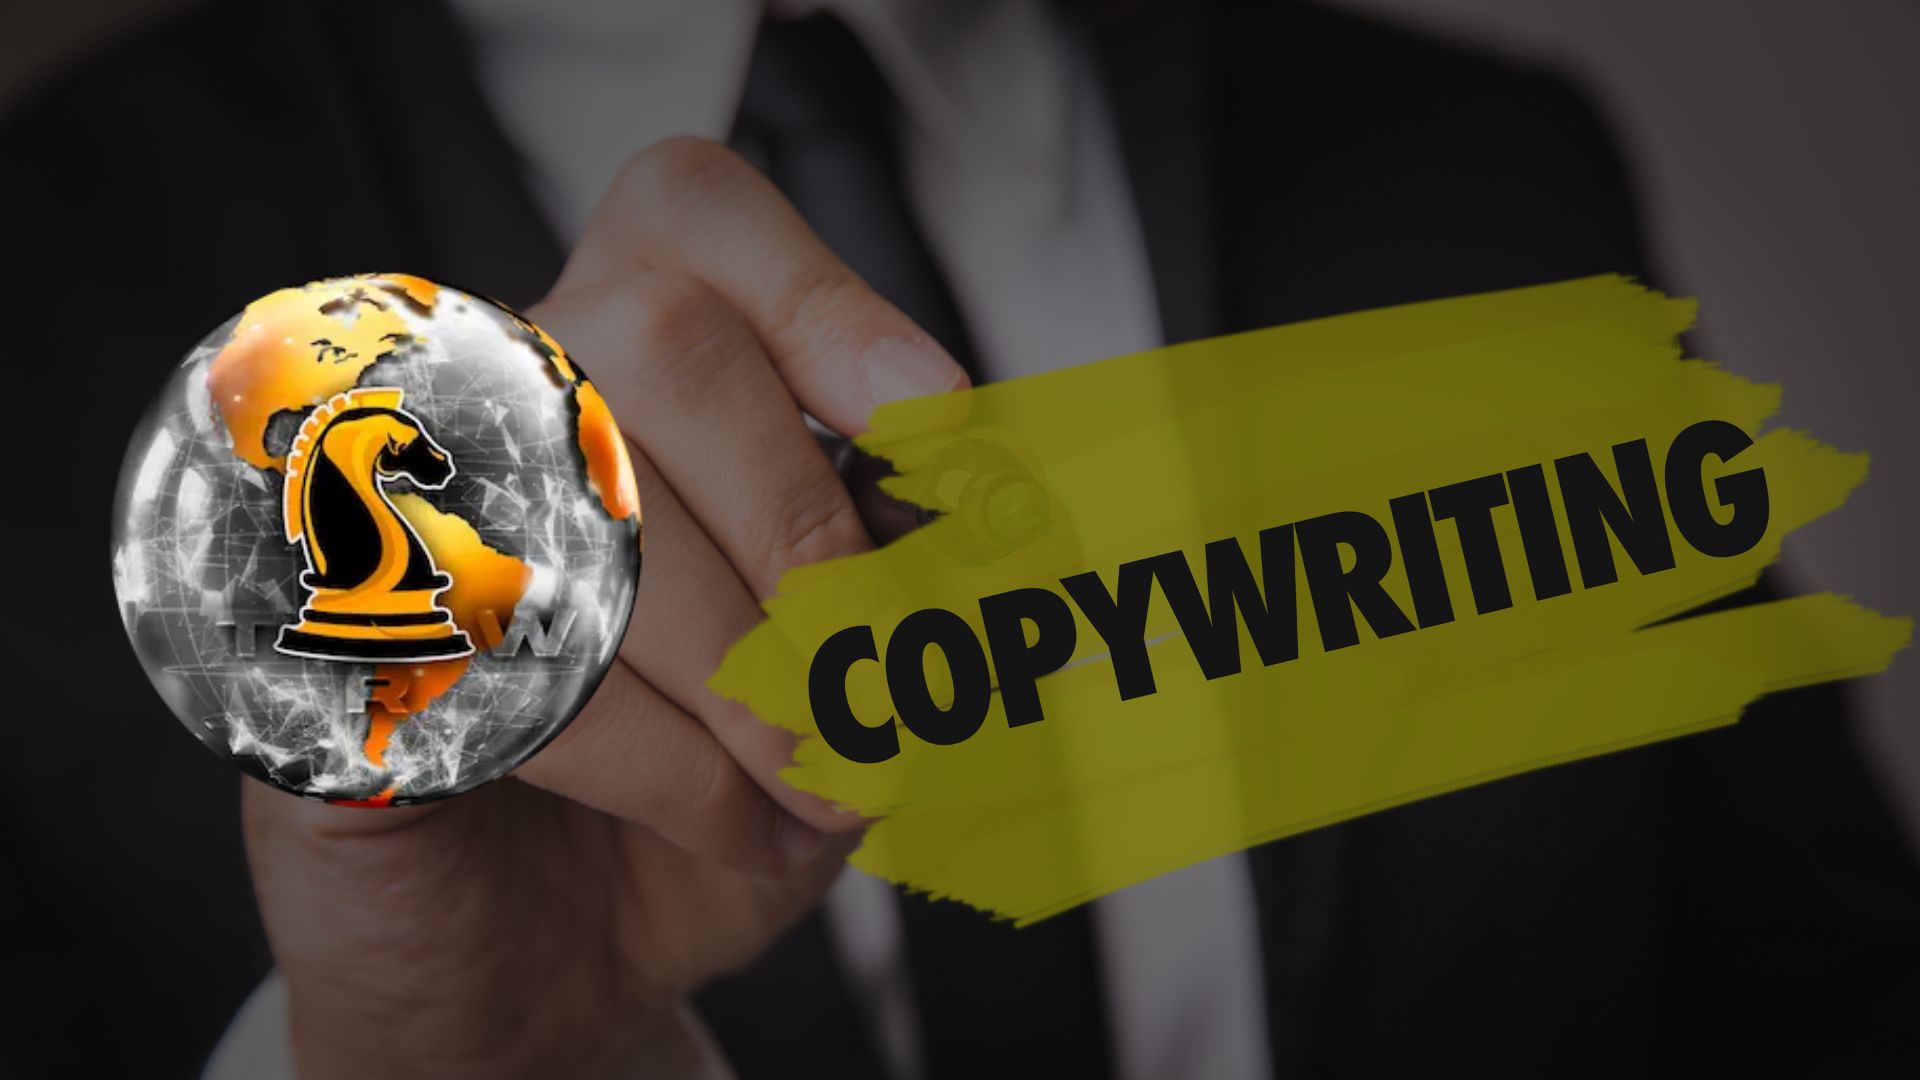 The Real World Copywriting | by Andrew Tate